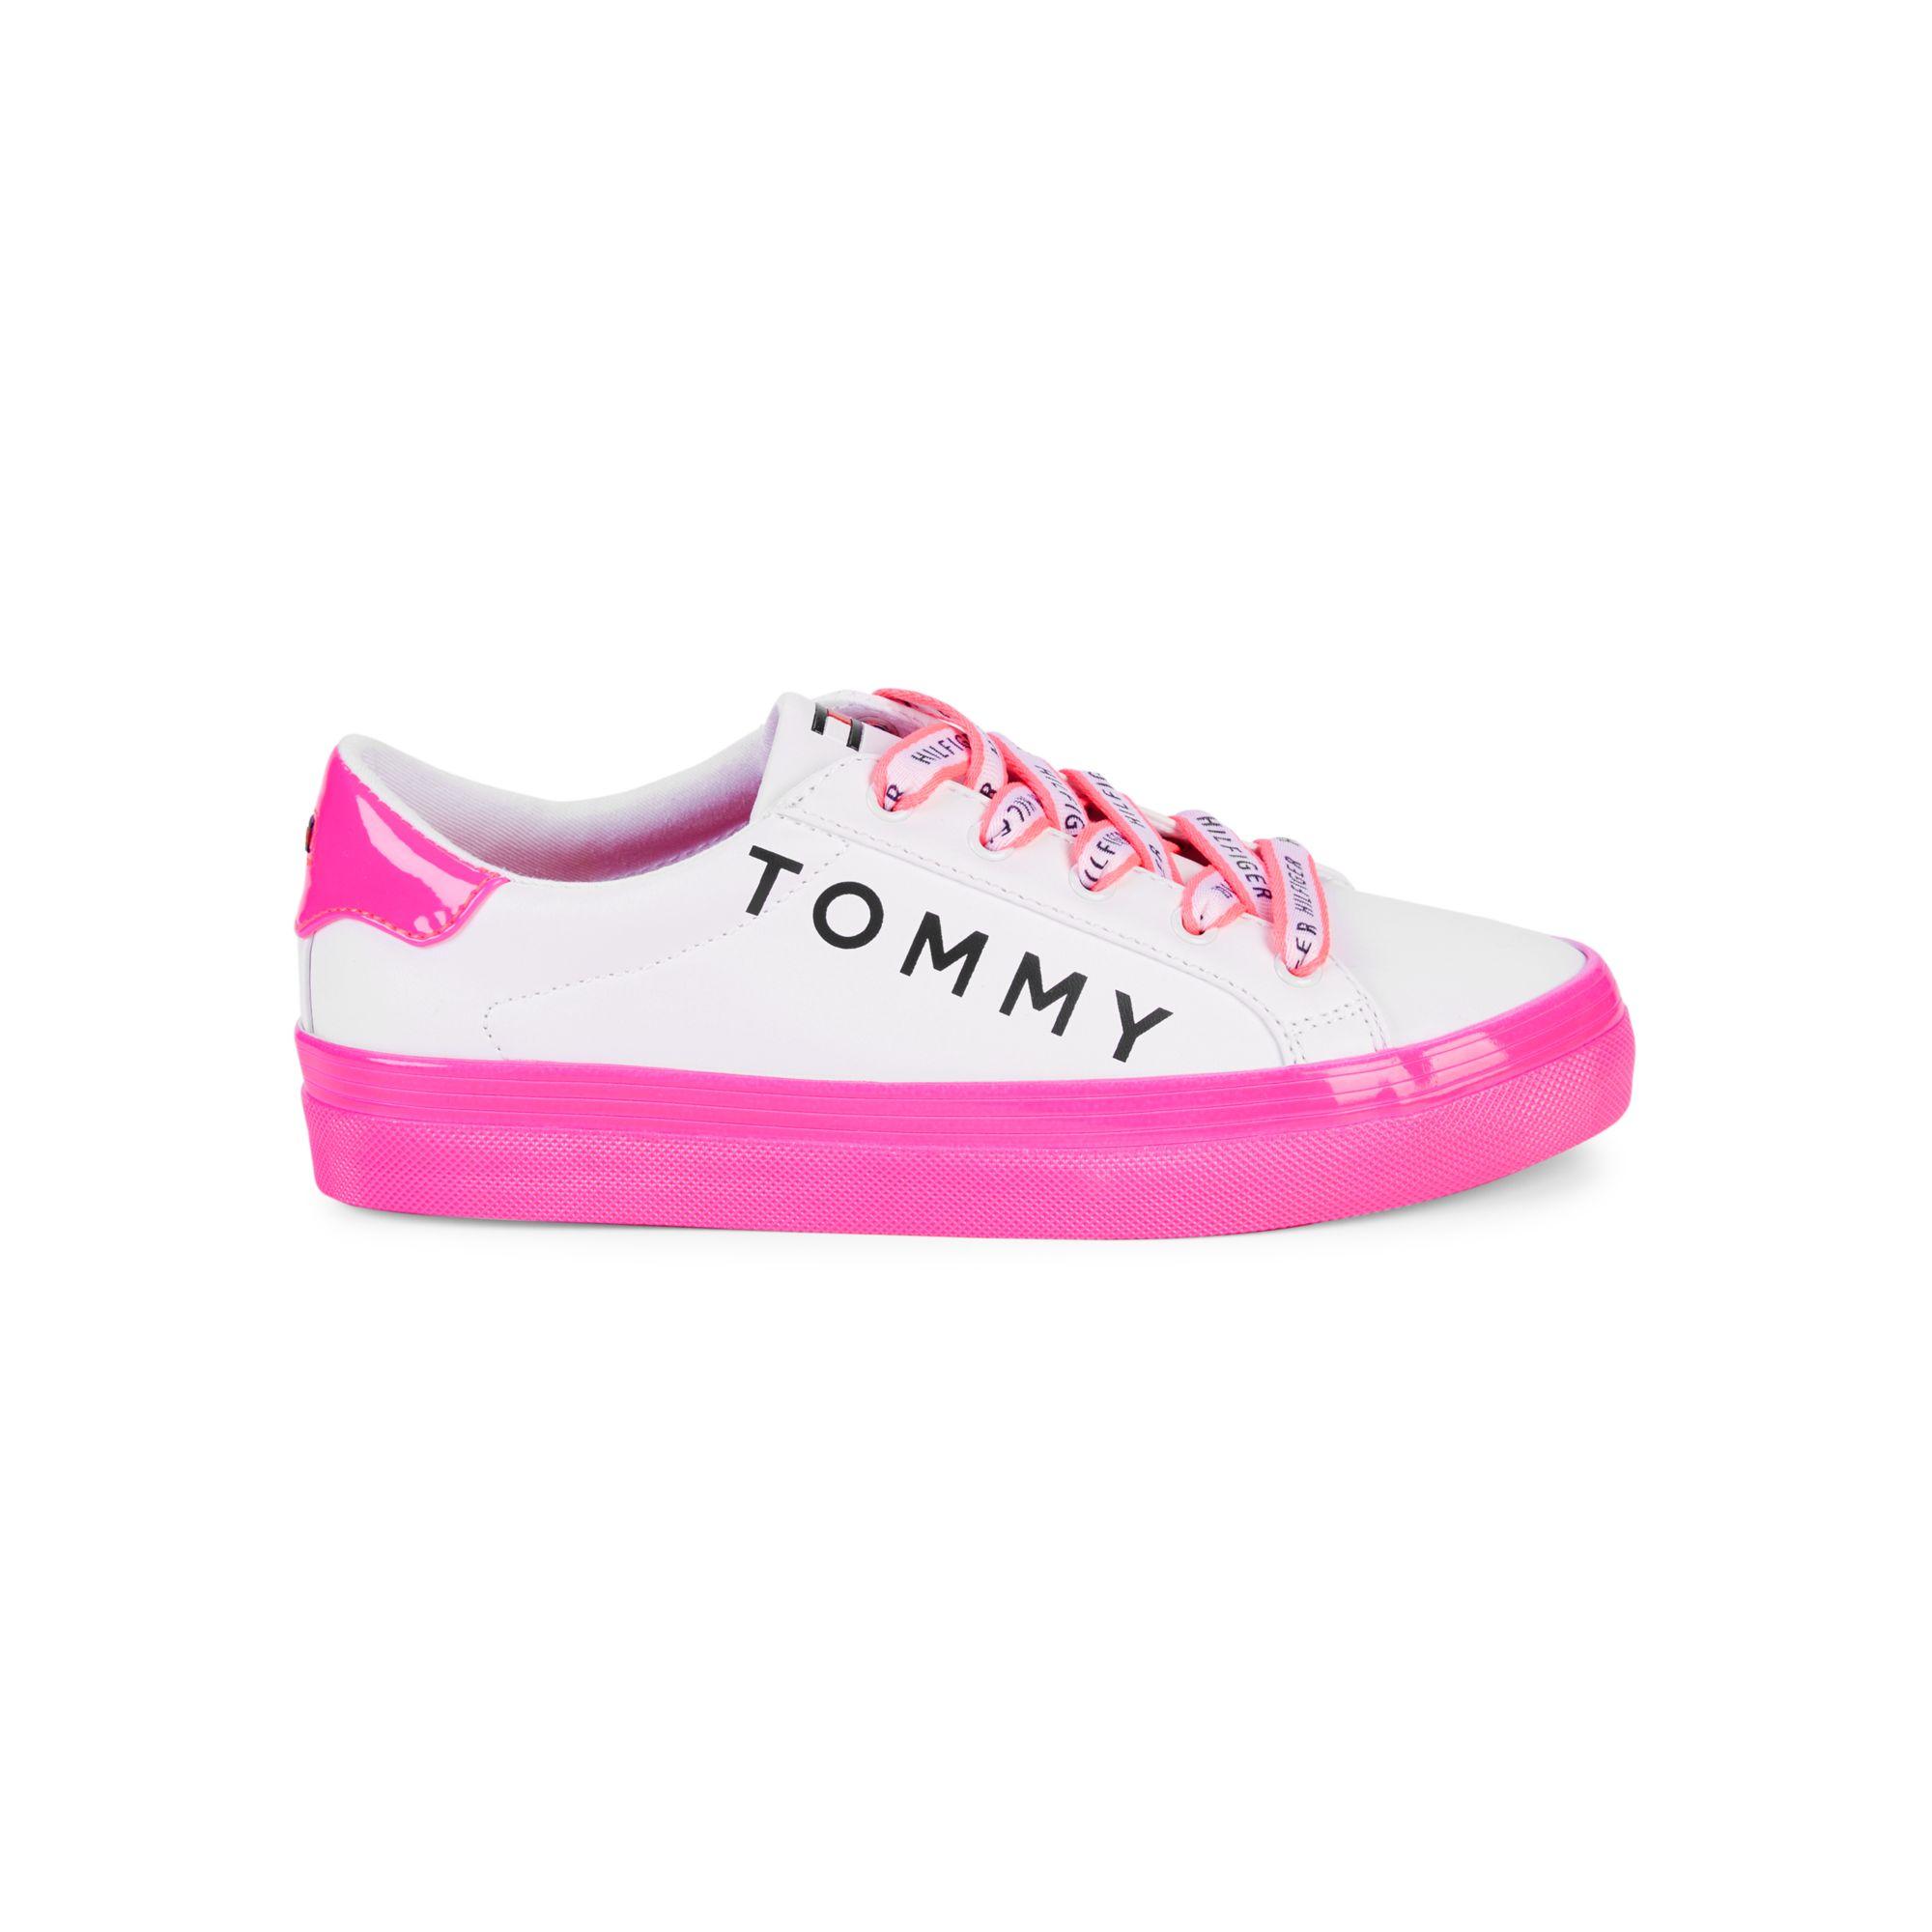 Tommy Hilfiger Foxton Sneakers in Pink | Lyst